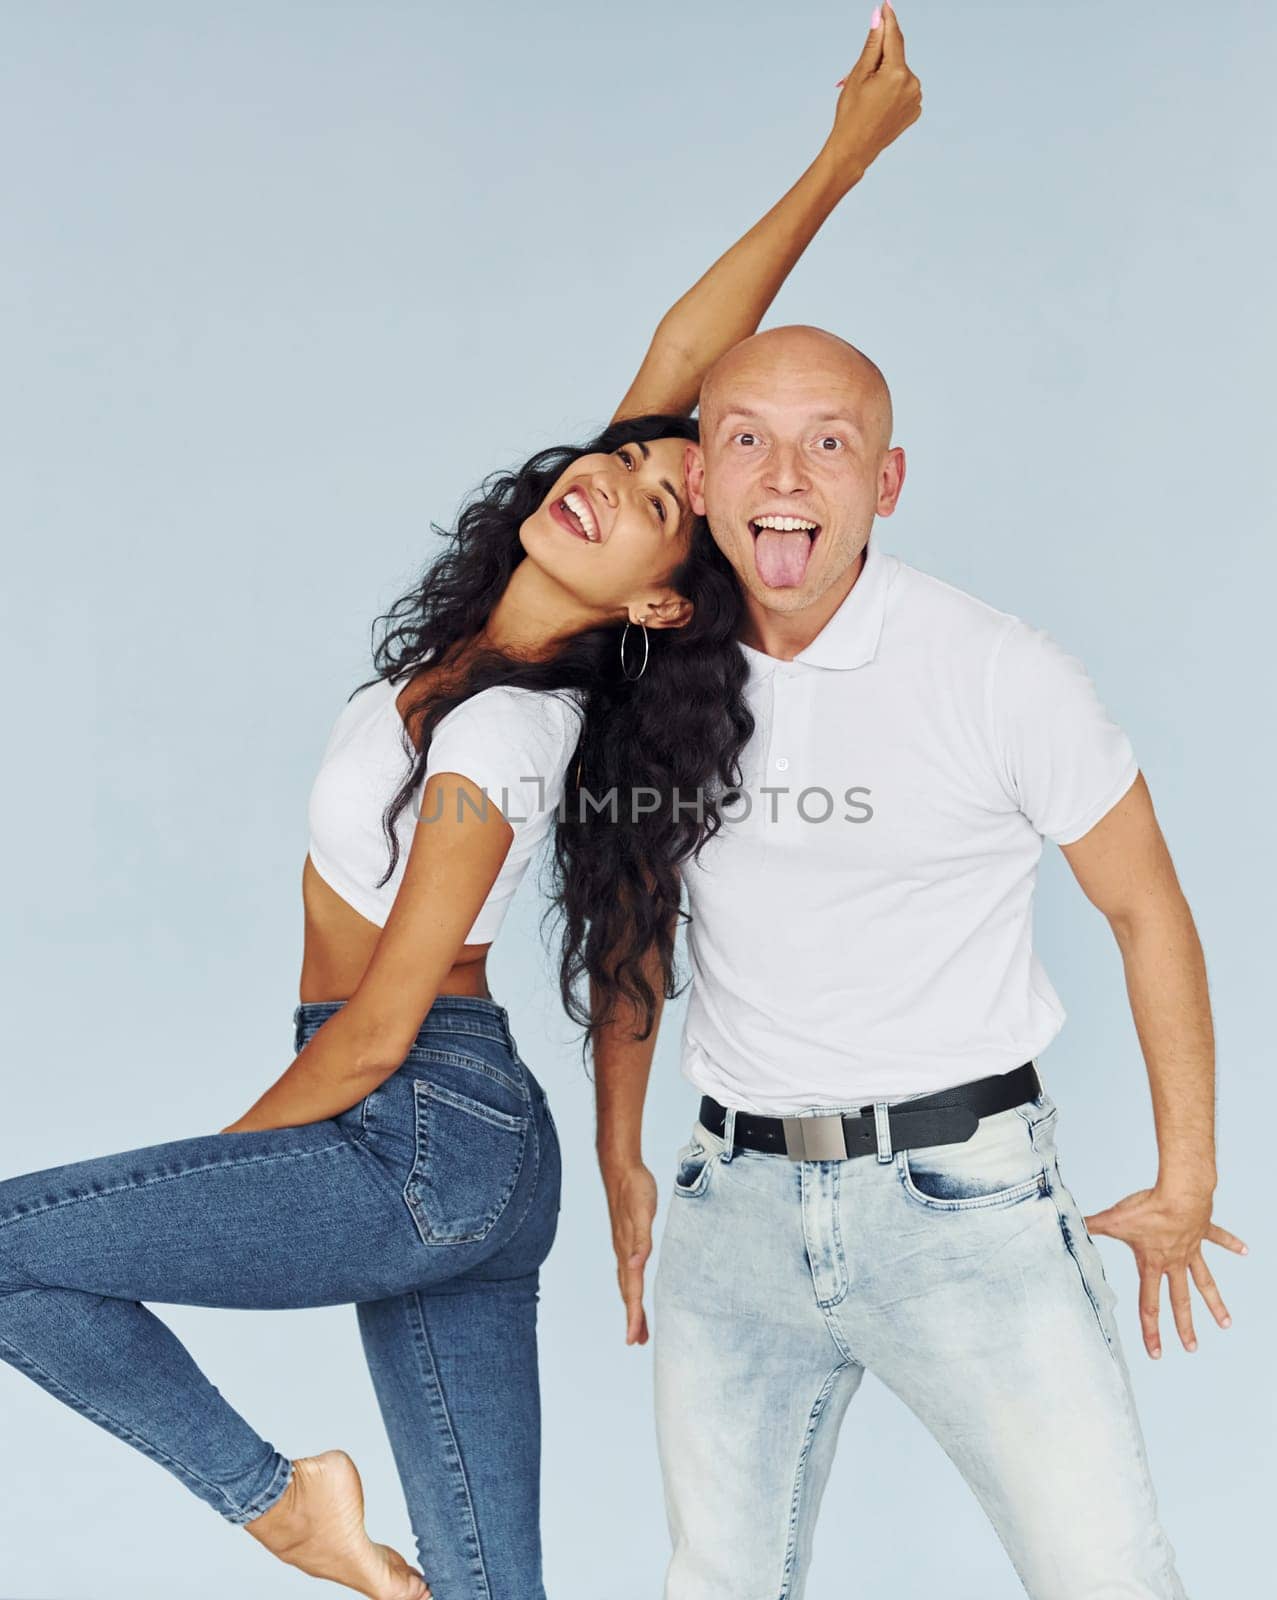 Gesturing and having fun. Cheerful couple is together indoors.